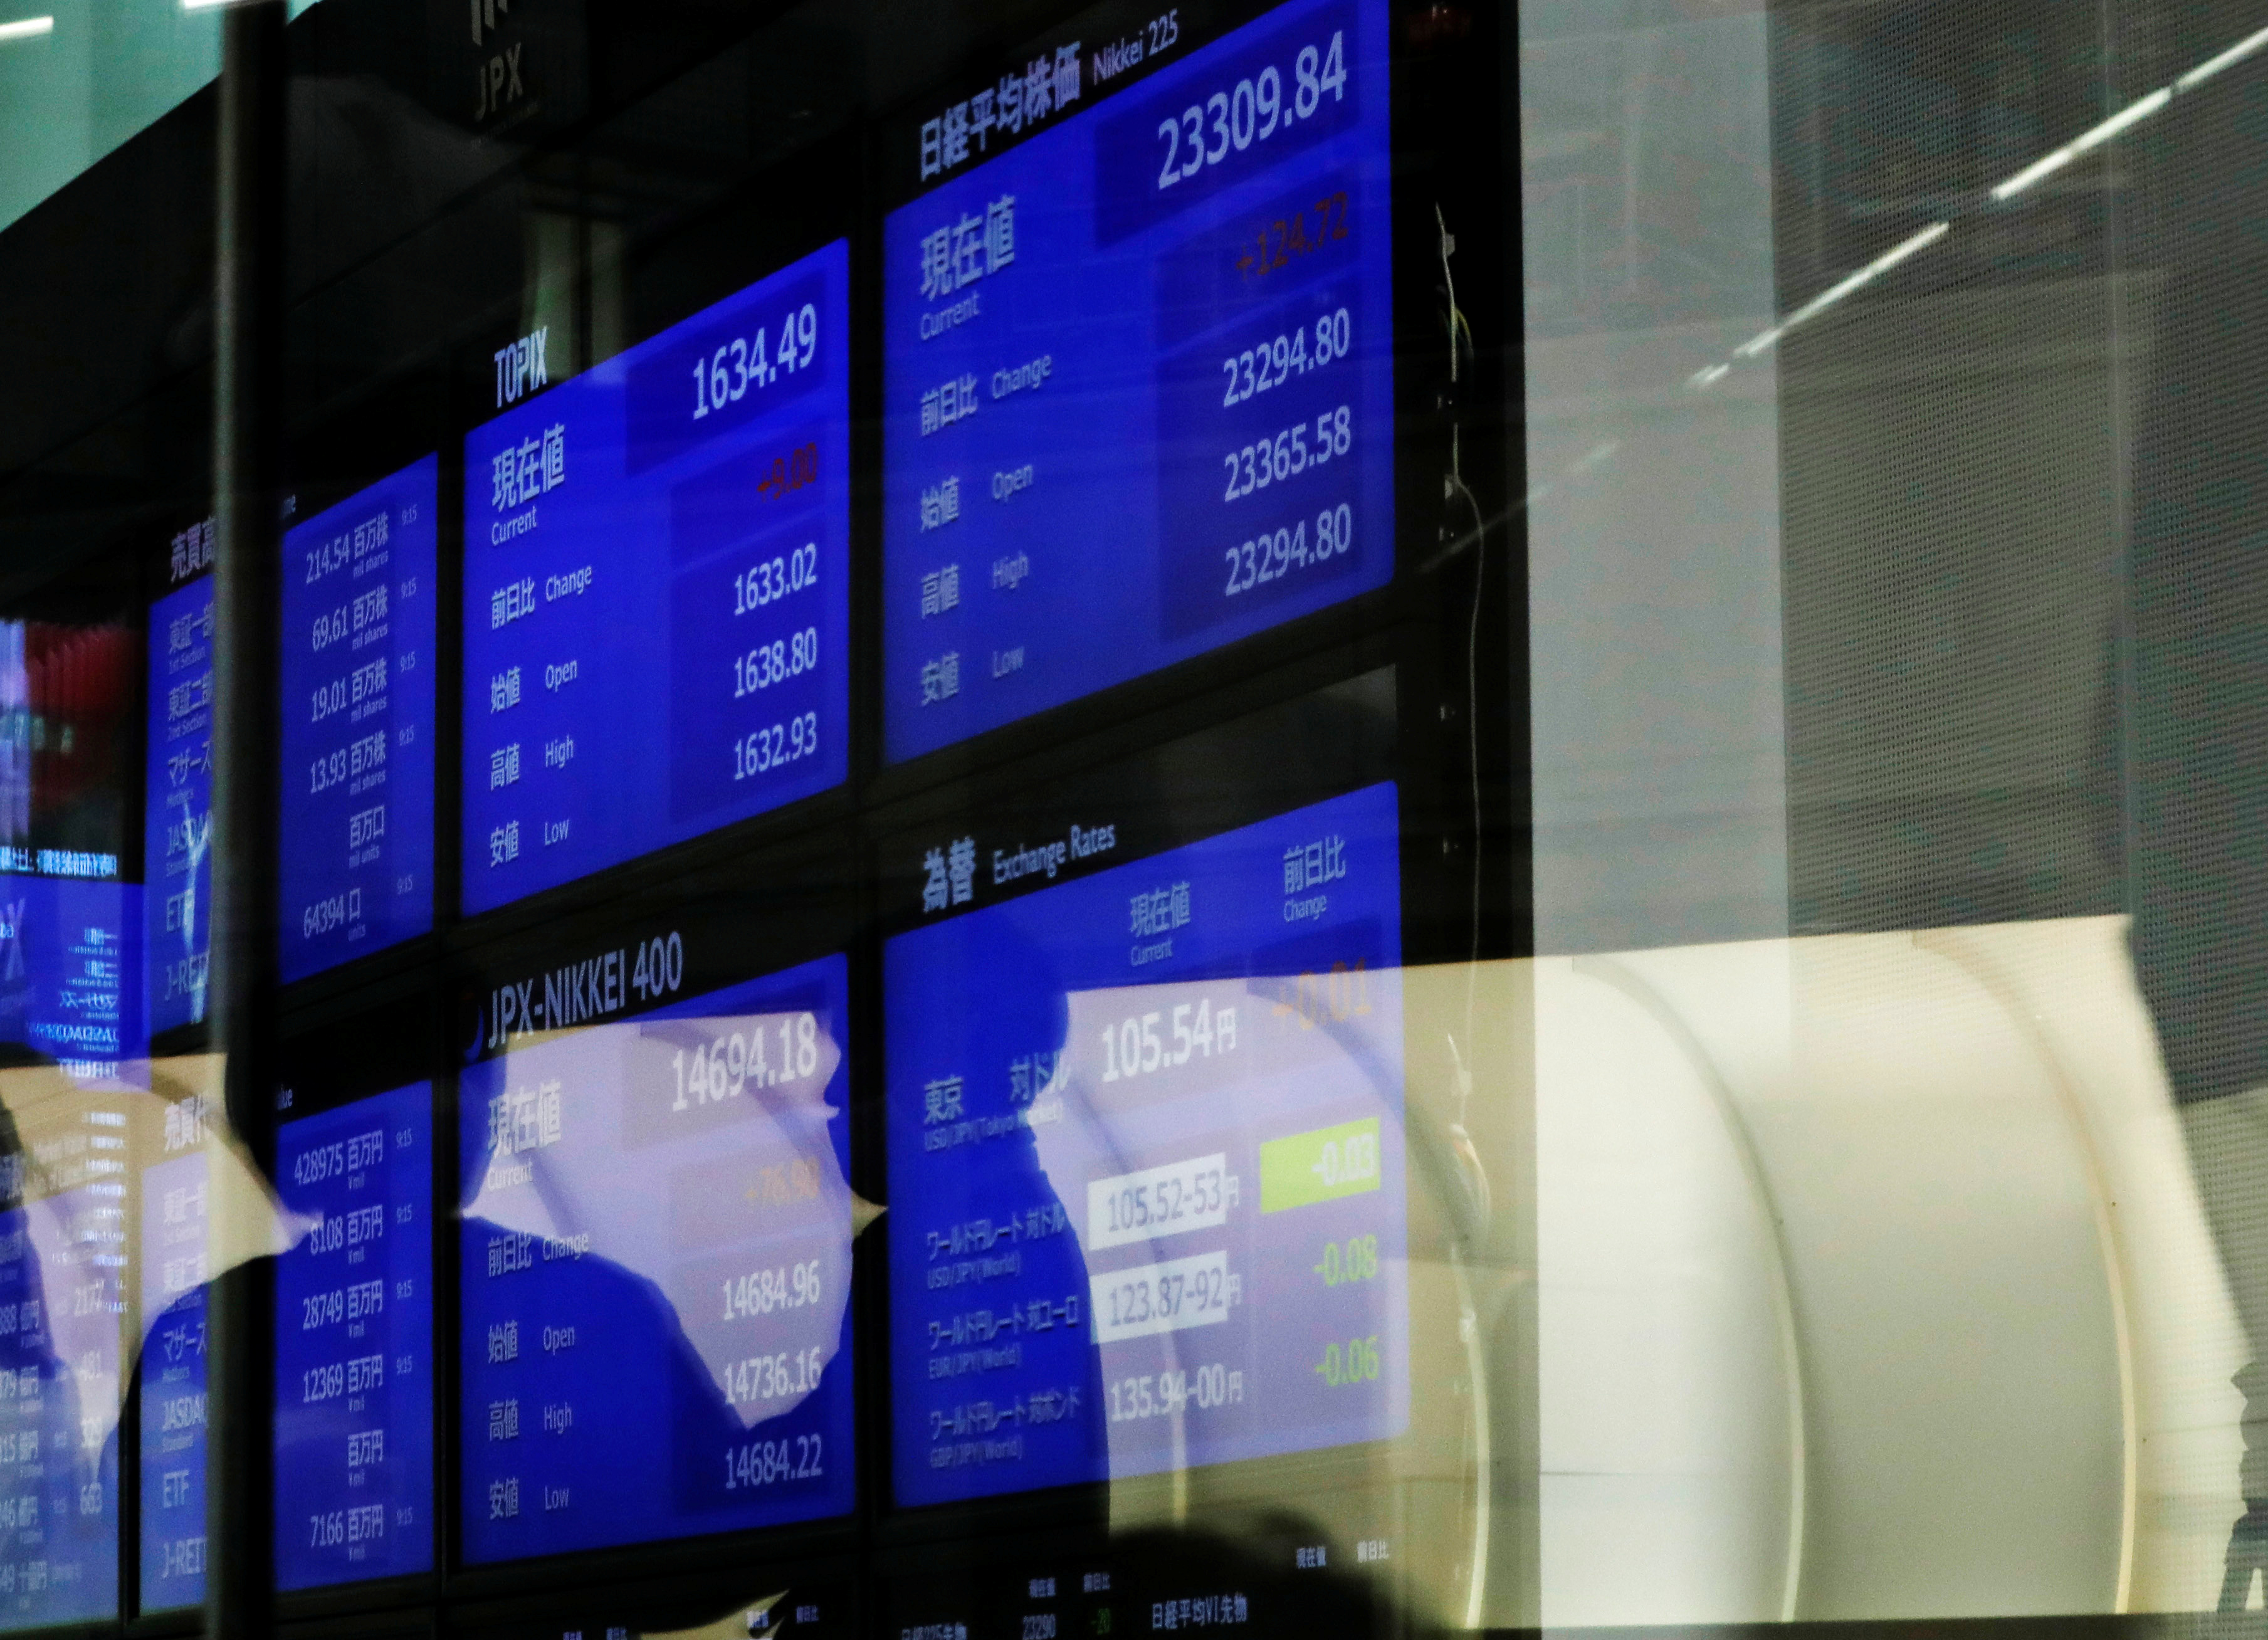 People are reflected on a glass in front of a large screen showing stock prices at the Tokyo Stock Exchange after market opens in Tokyo